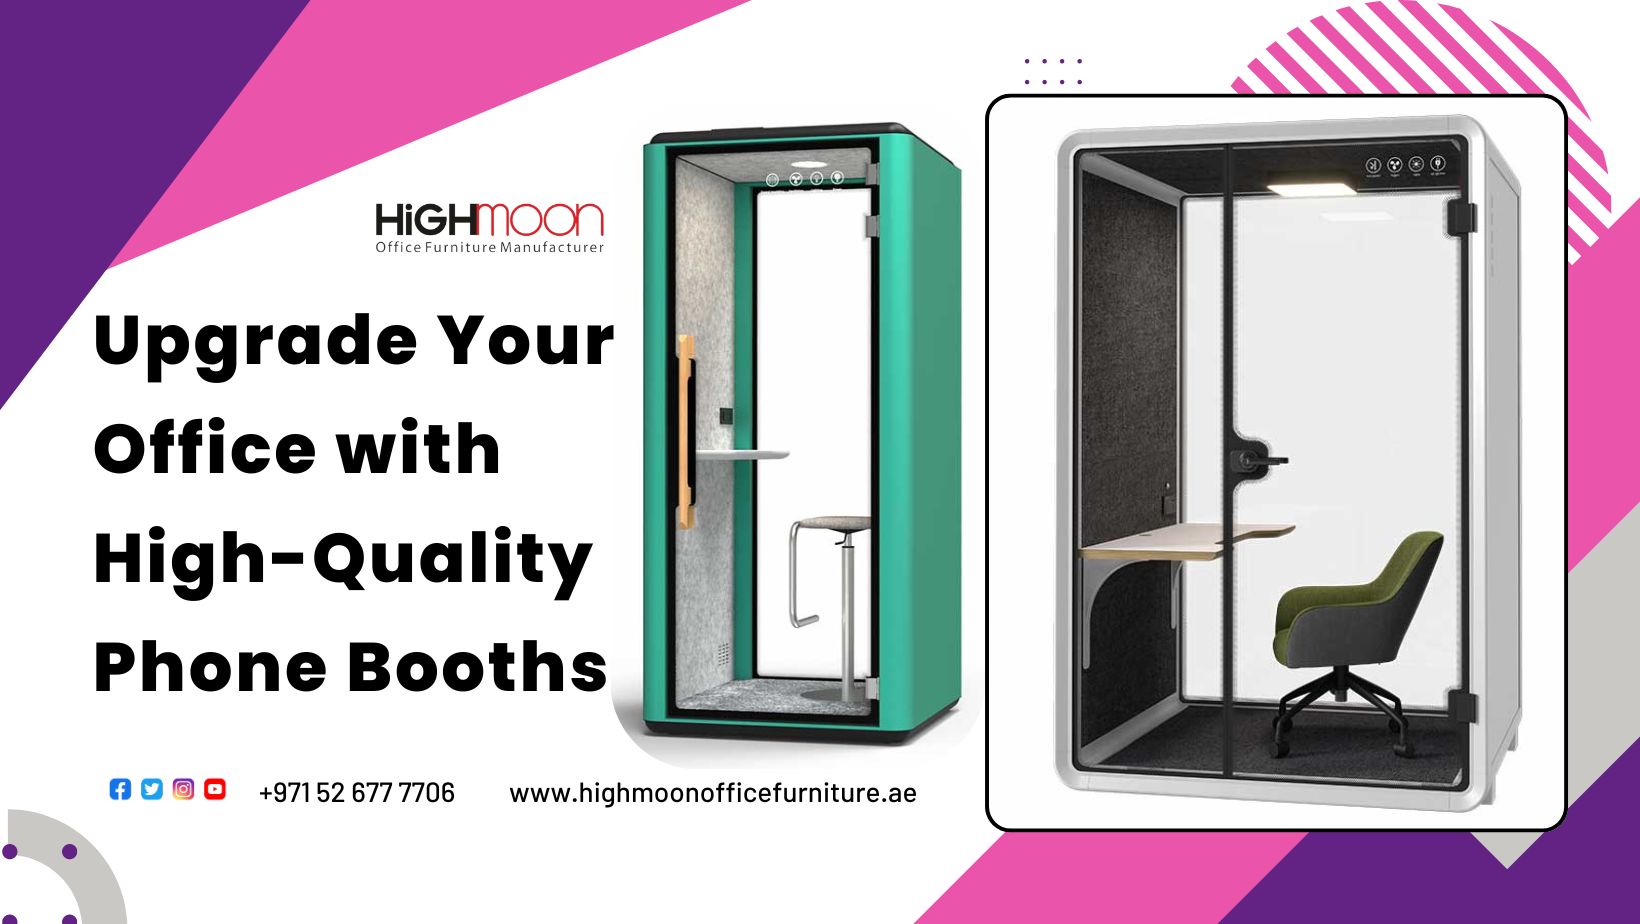 Upgrade Your Office with High-Quality Phone Booths